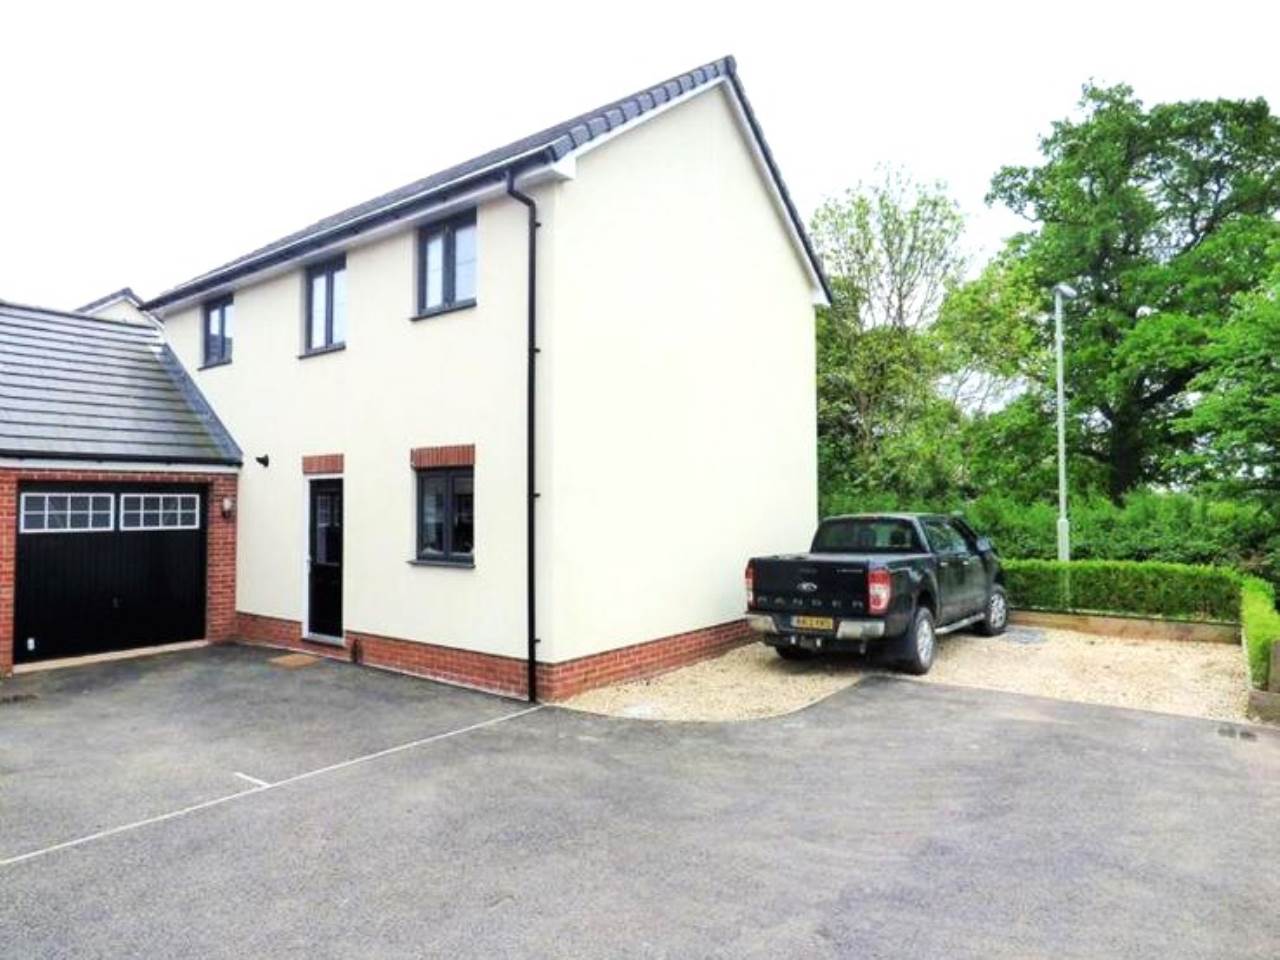 3 bed House (unspecified) for rent in Hardwicke. From Property Wise